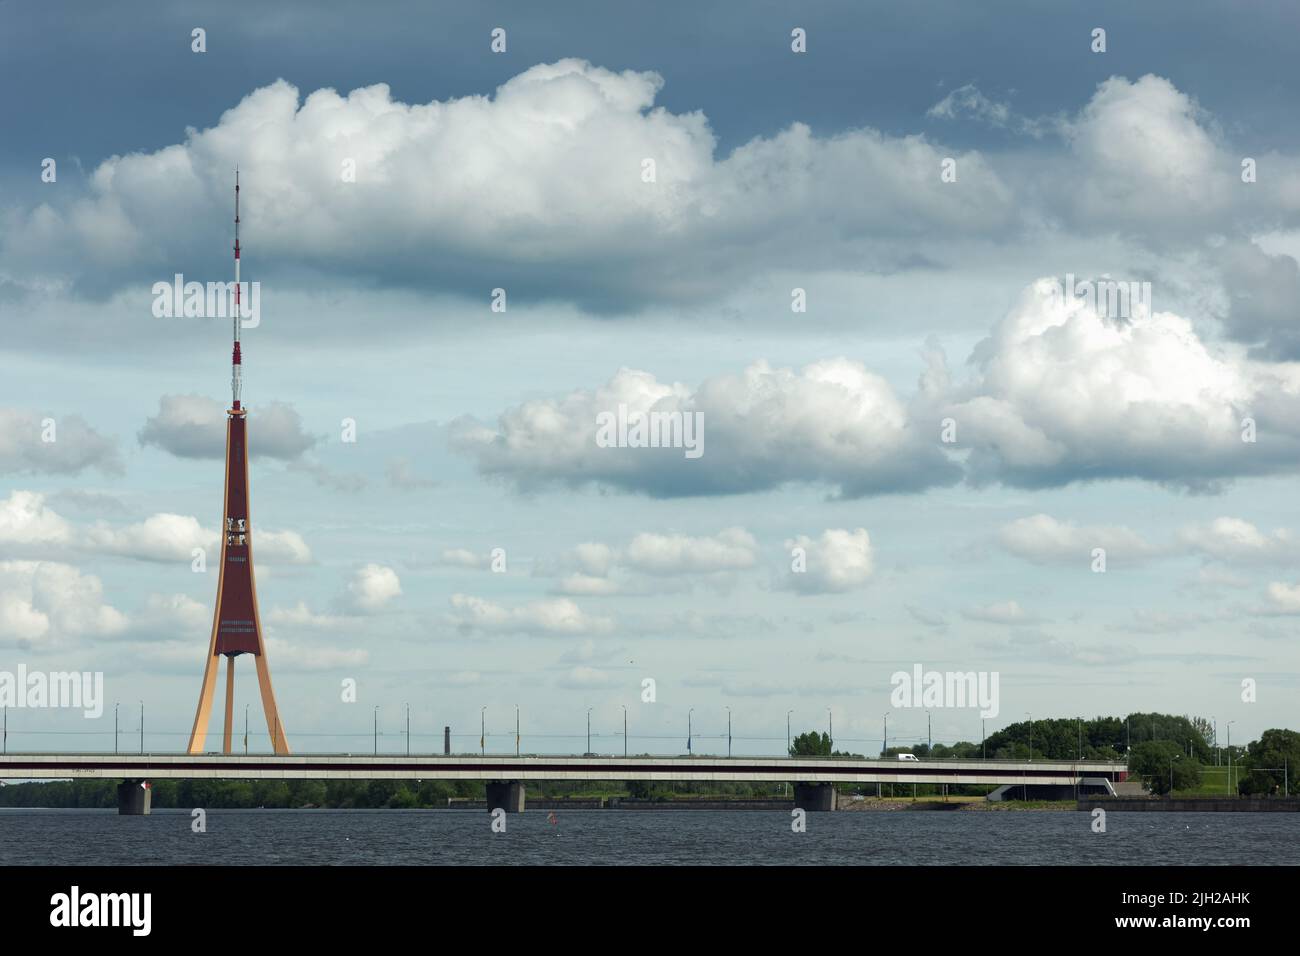 View to the river Daugava and Riga TV tower. Built in 1979-1986, the tower is 386.5 m tall Stock Photo